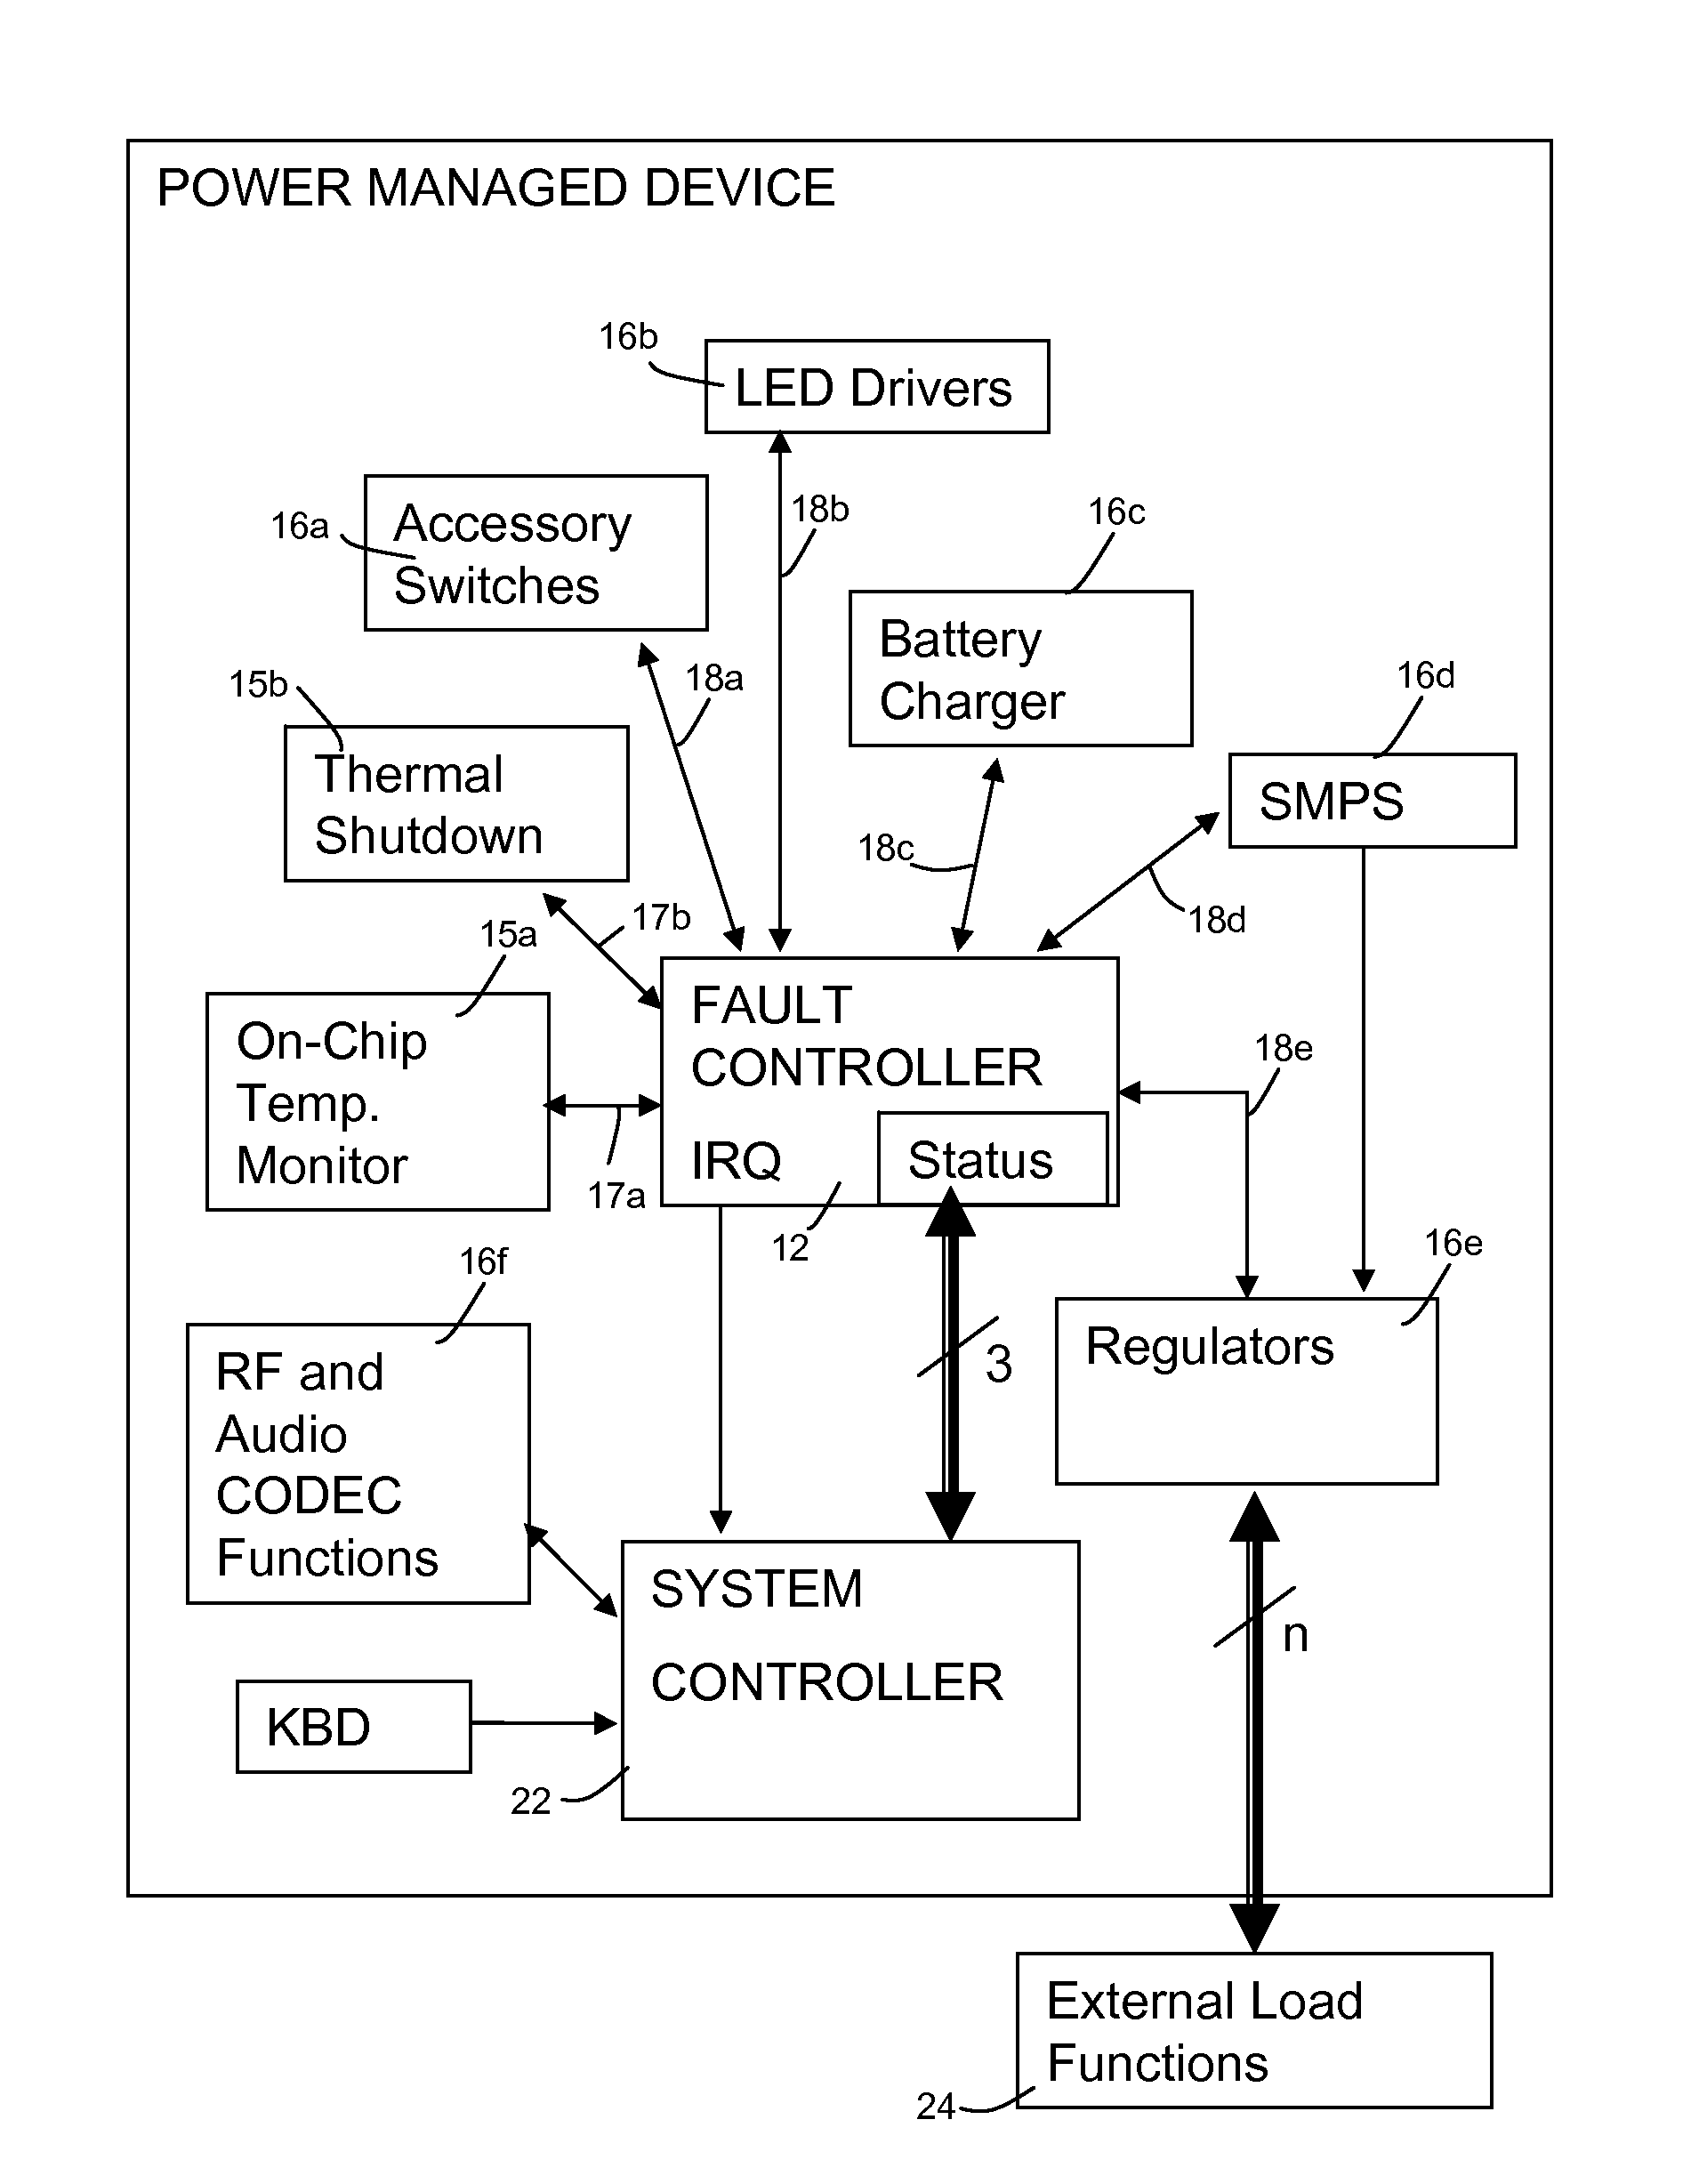 Integrated current fault controller